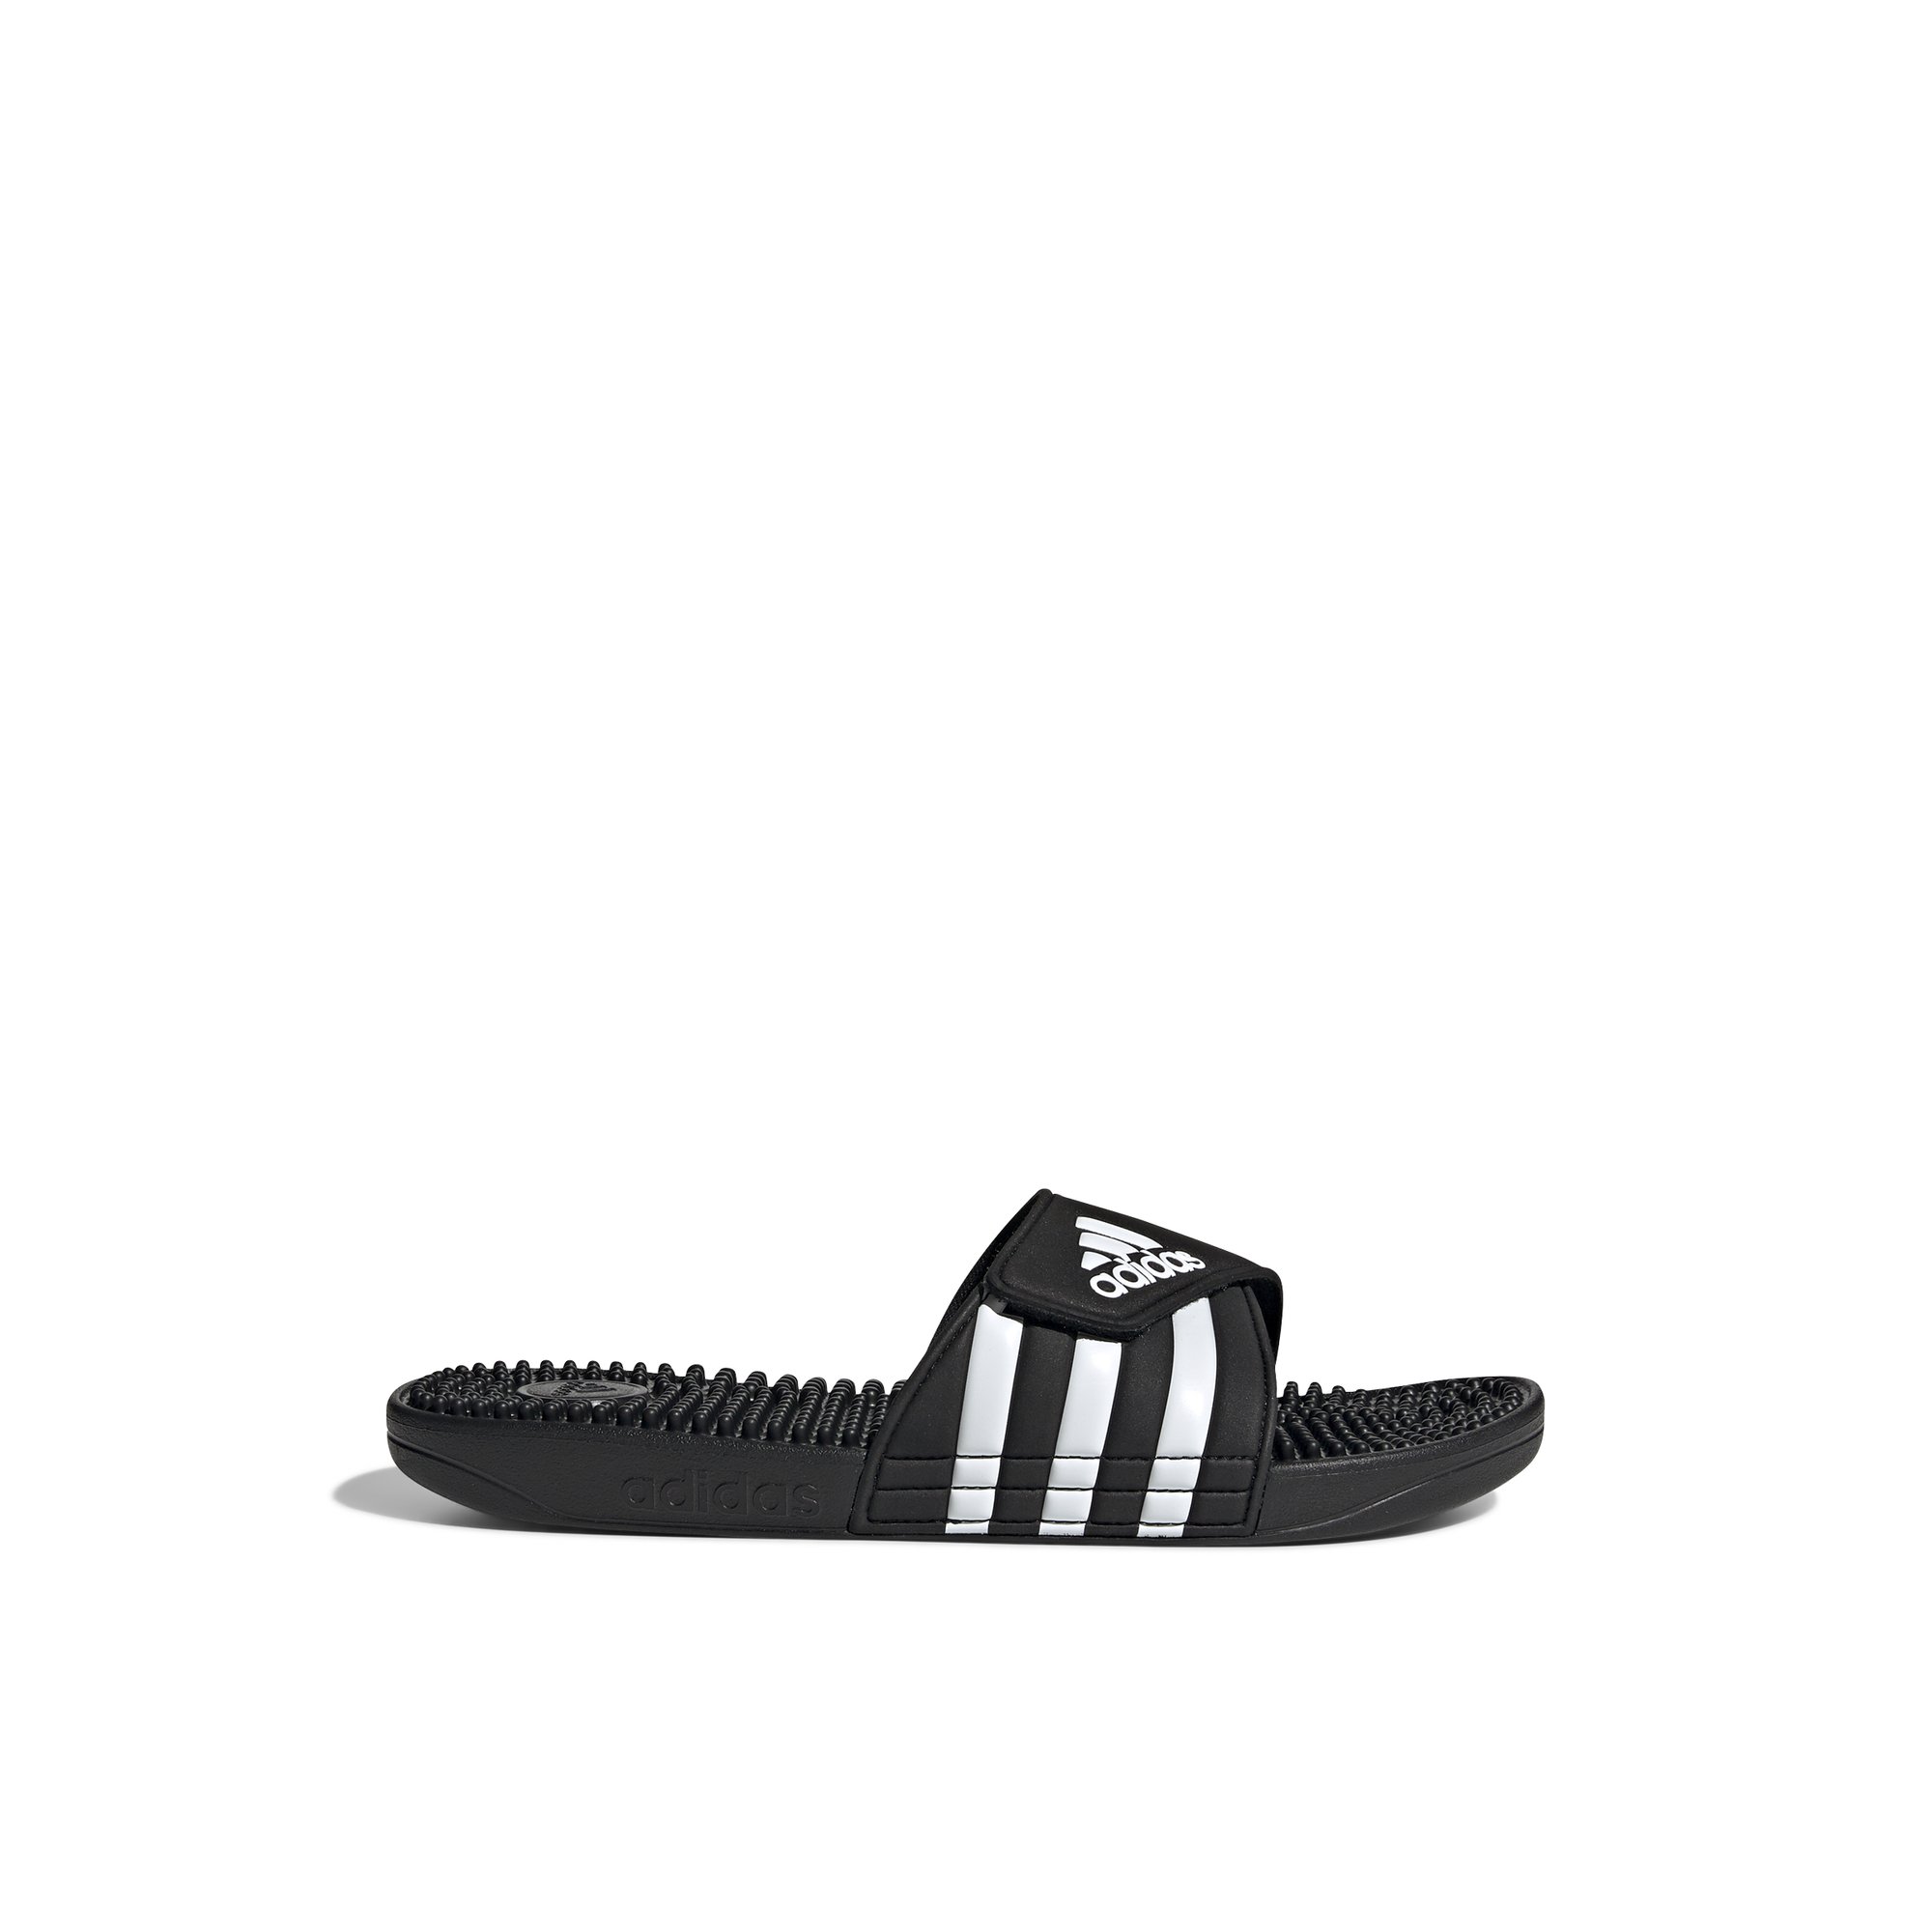 Adidas Adissage-tb. - T Collection Shoes Boys